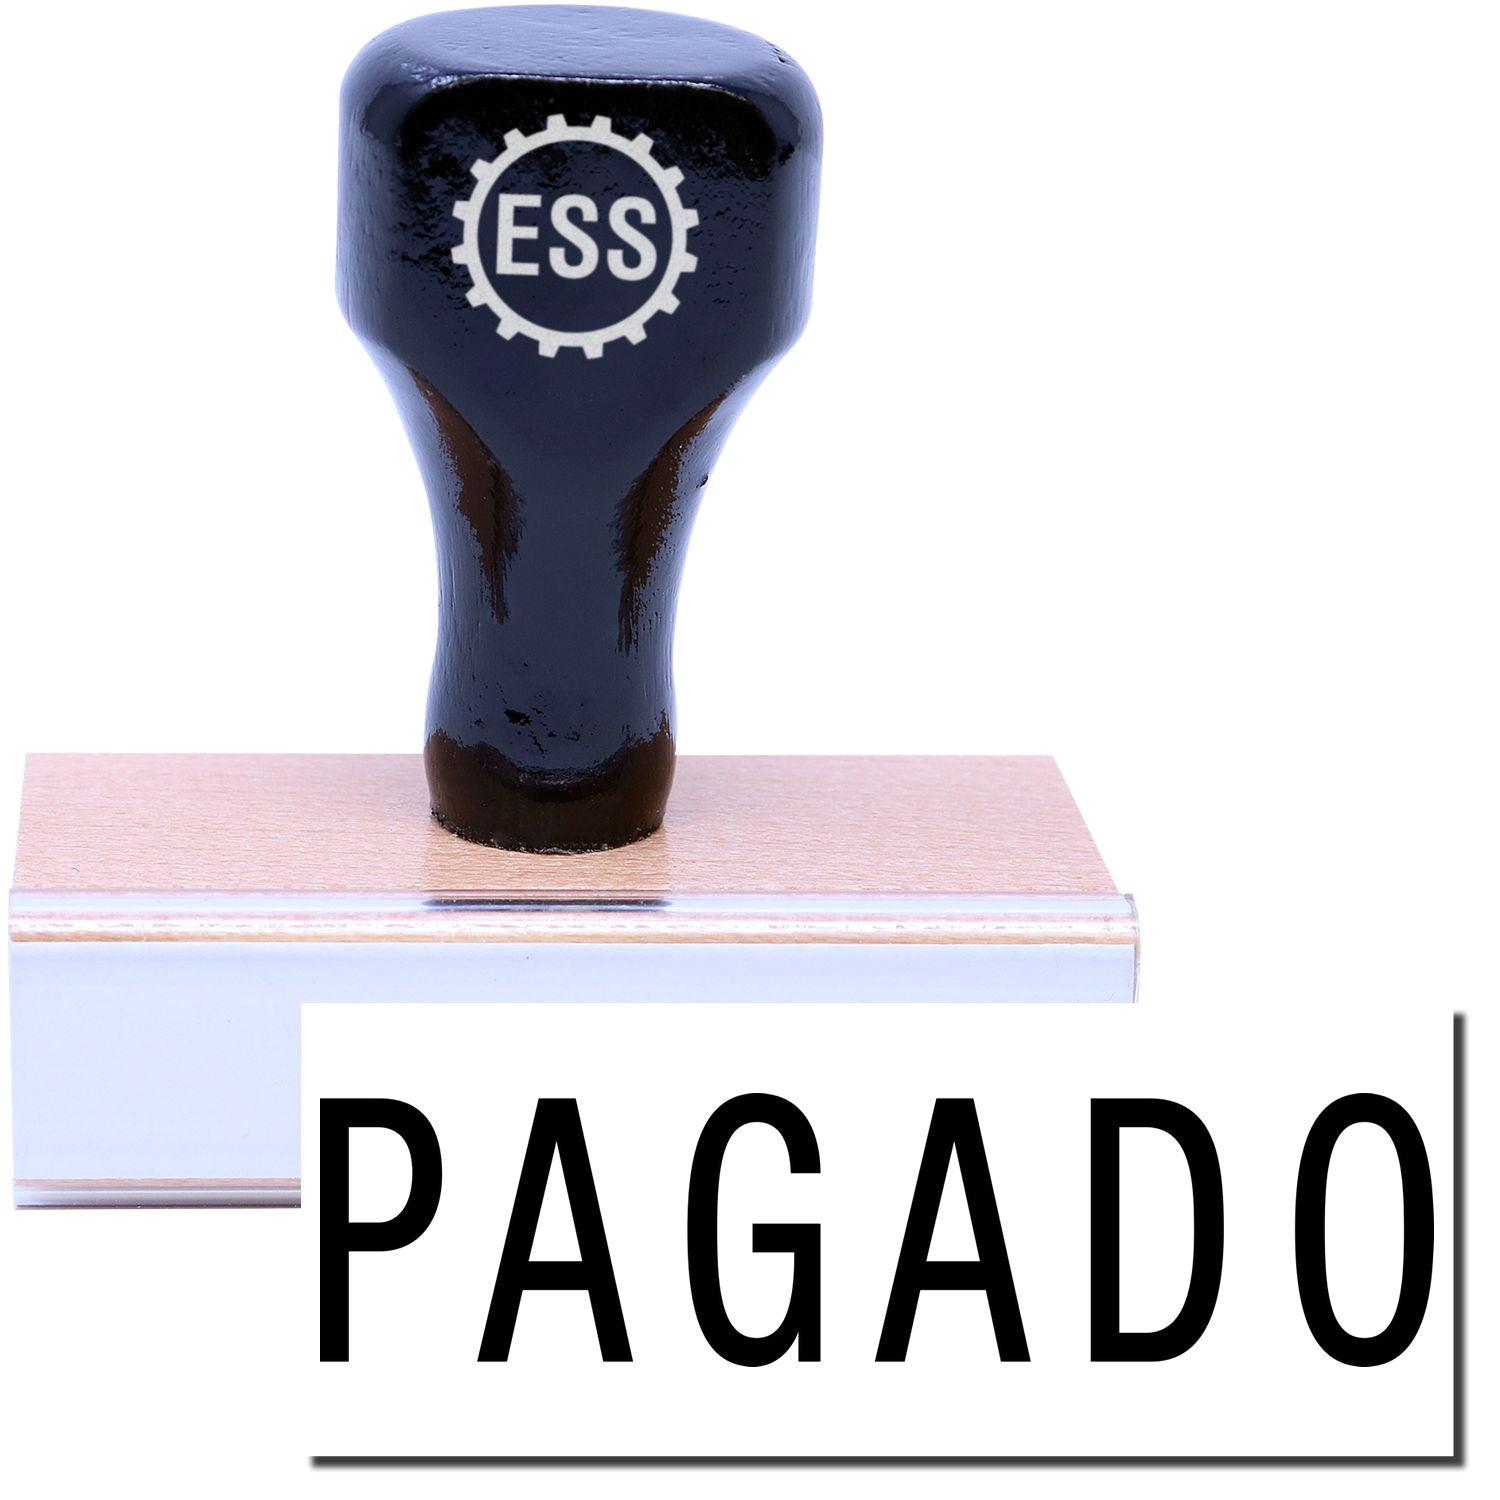 A stock office rubber stamp with a stamped image showing how the text "PAGADO" in a large font is displayed after stamping.